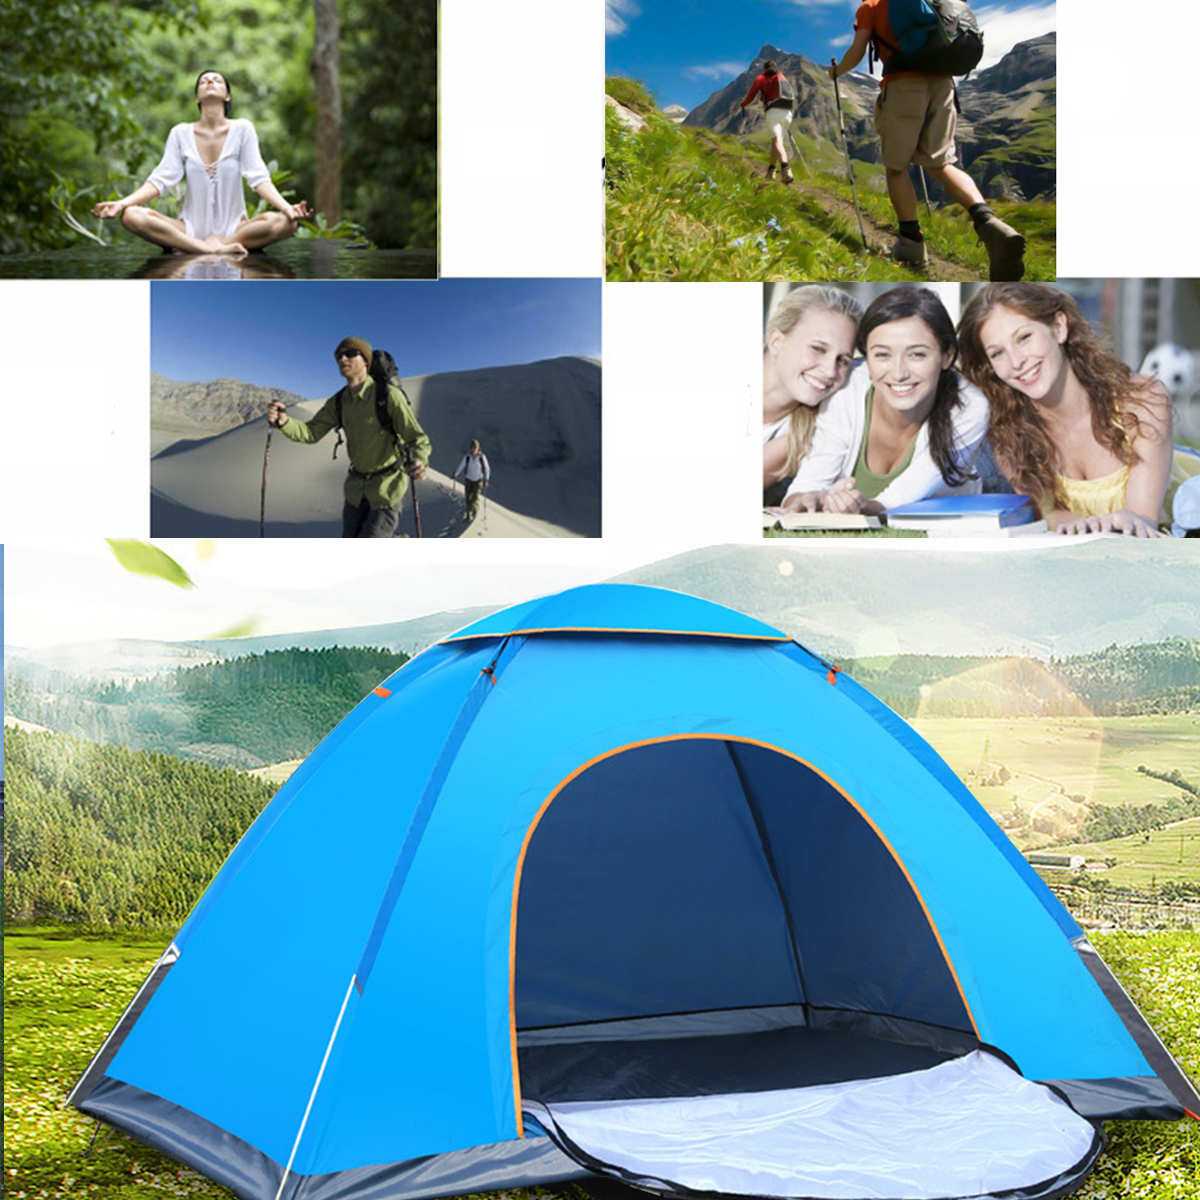 IPRee® 2-3 Person Folding Automatic Tent Camping Tent Outdoor Outdoor Waterproof Pesca Caminhadas Tent Tent